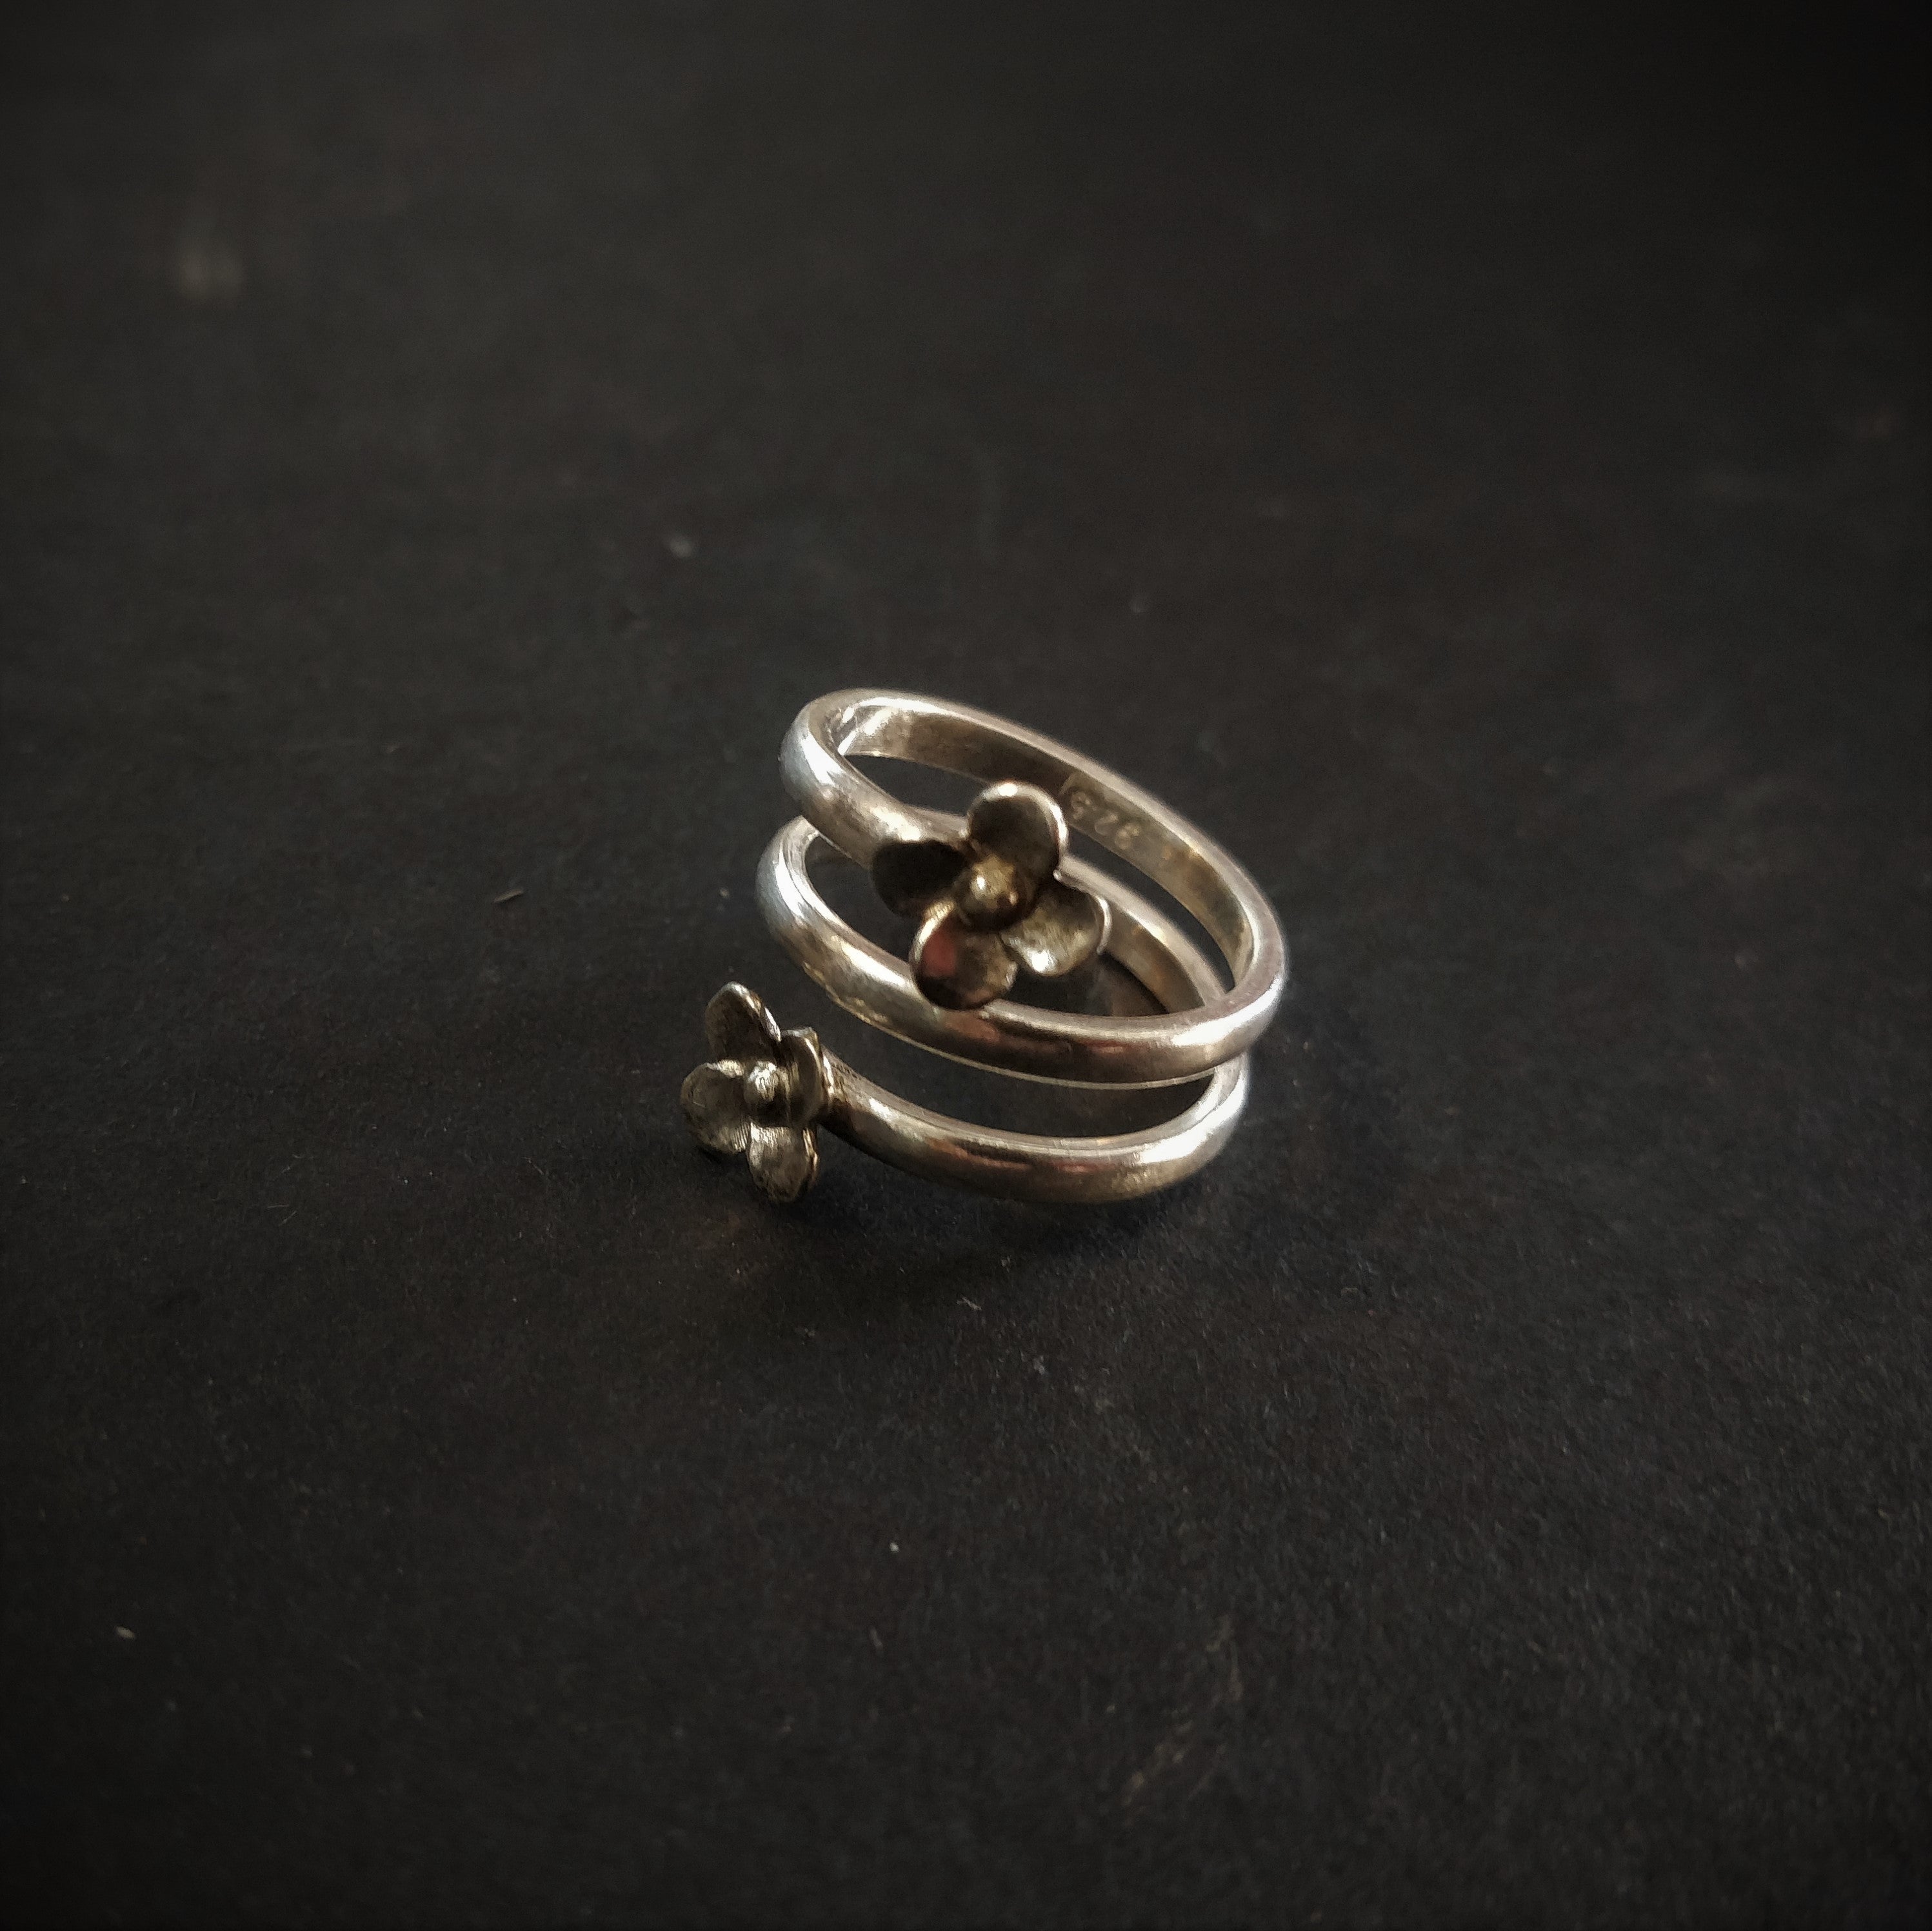 Brass Artificial Oxidized Toe Rings For Women and Girls, Size: Adjustable  Free Size, 20 Gm at Rs 55/pair in Jaipur